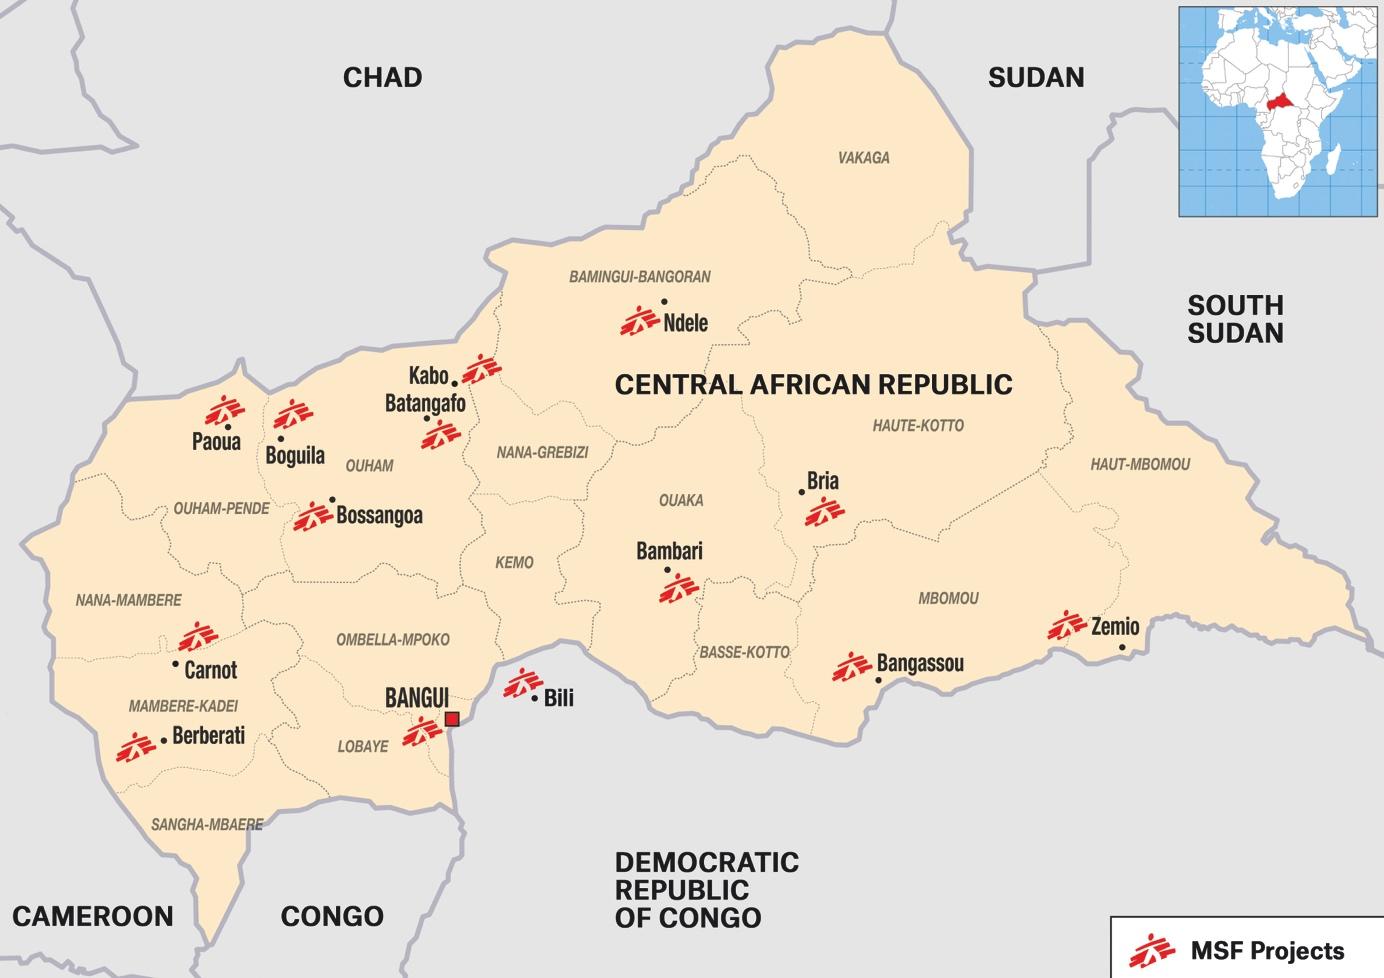 MSF projects in Central African Republic